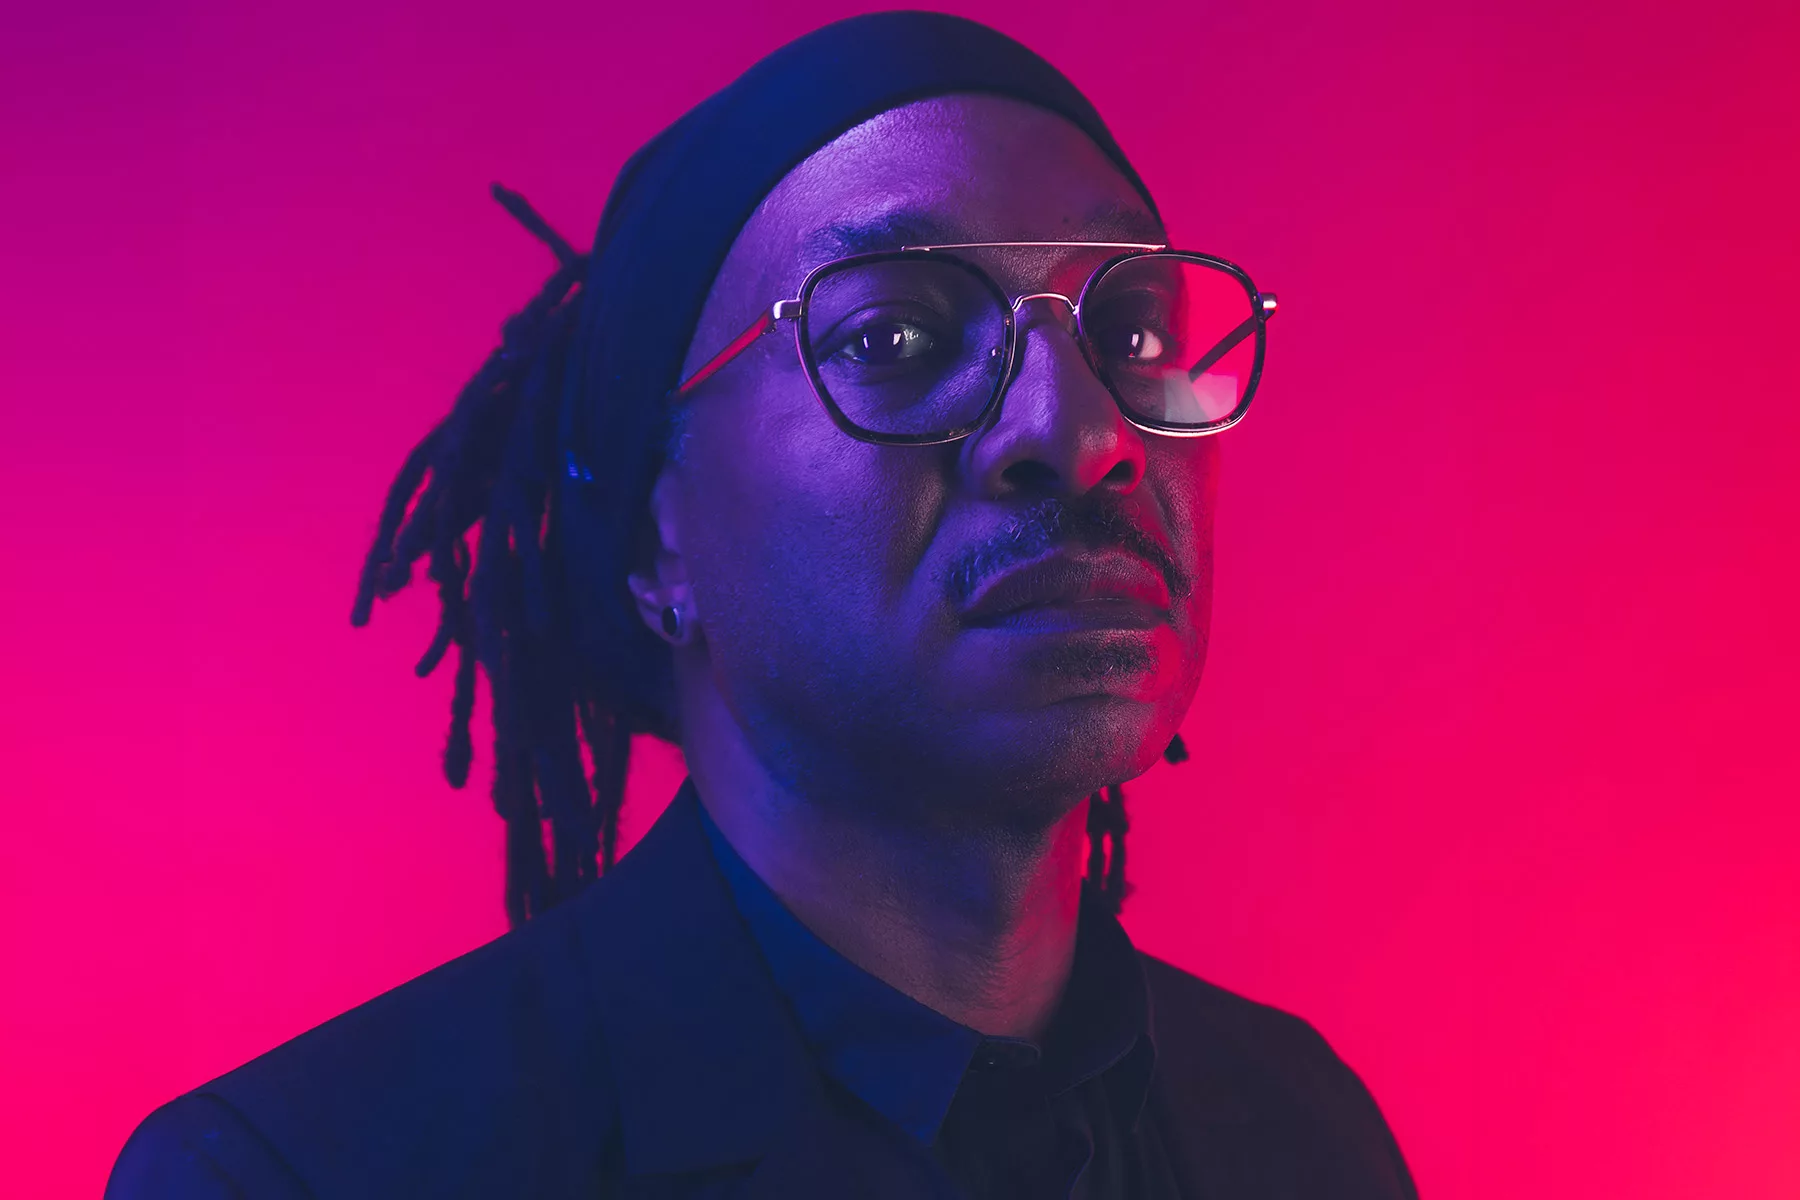 Stacey Pullen reignites Blackflag Recordings with ‘M€$O’